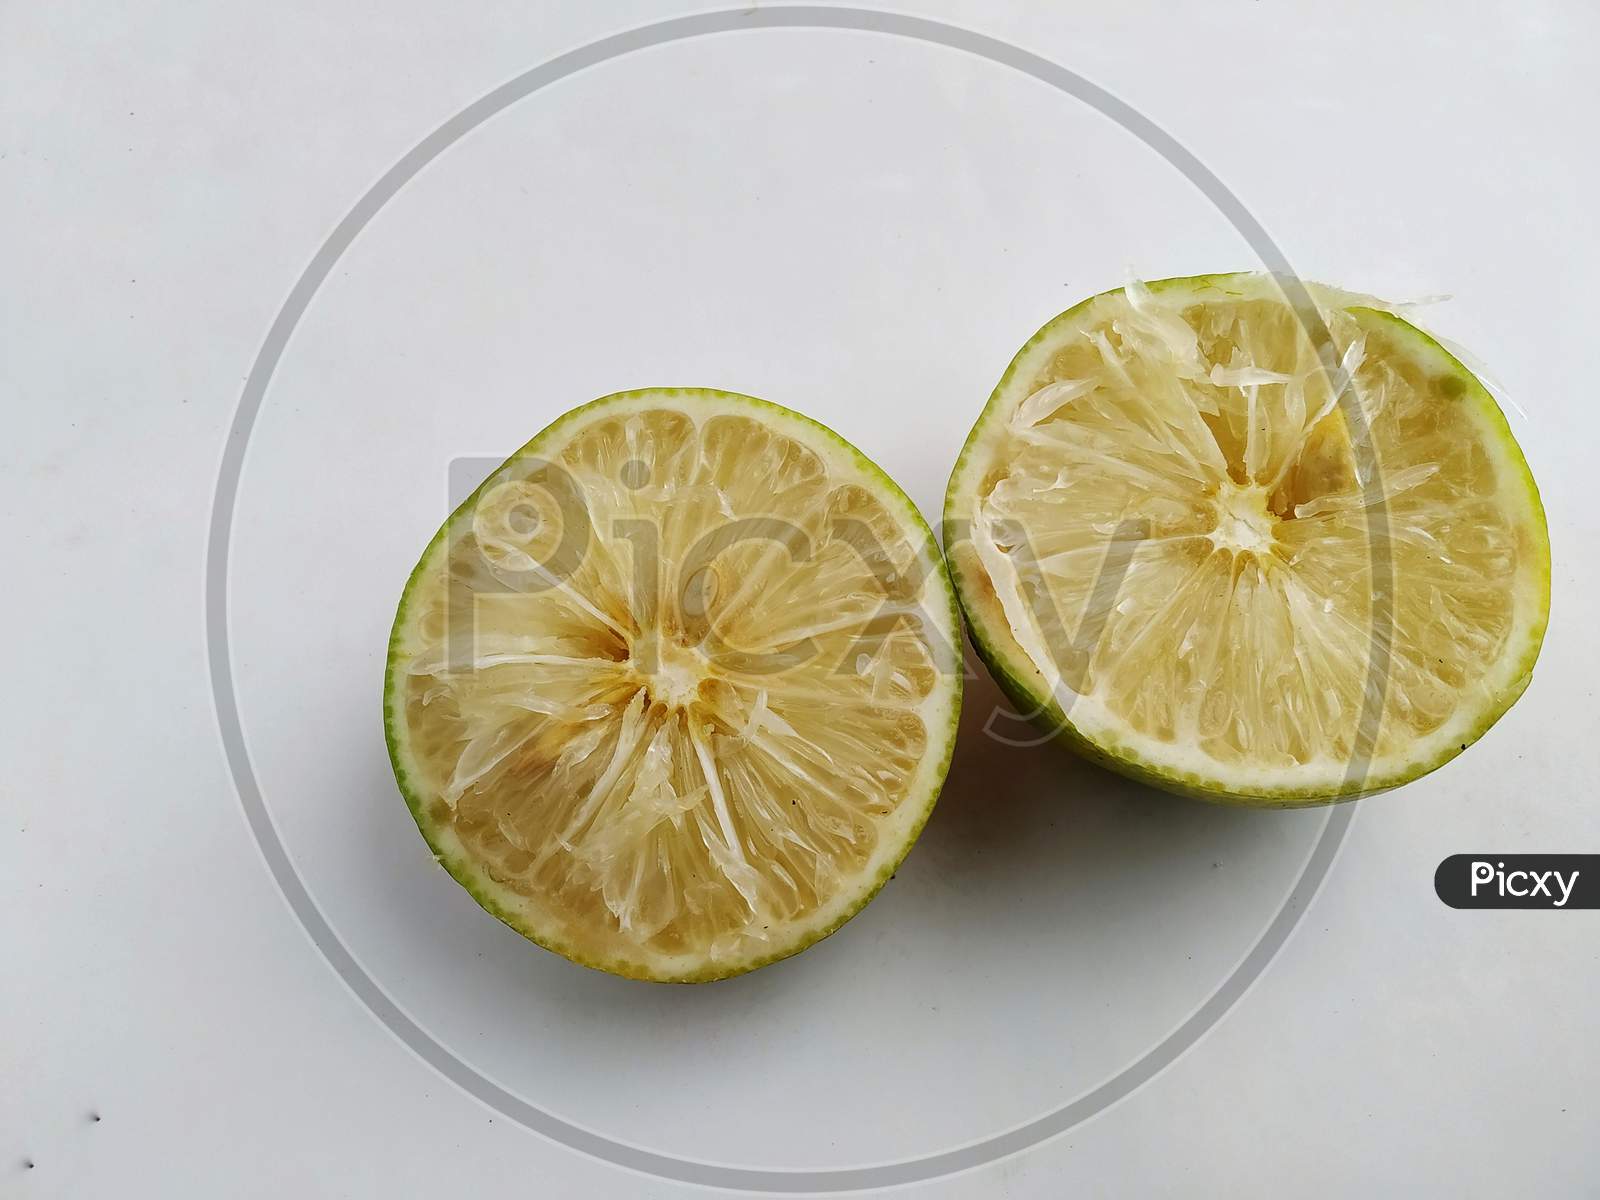 Photo Of Two Piece Of Mosambi, Also Known As Sweet Lemon